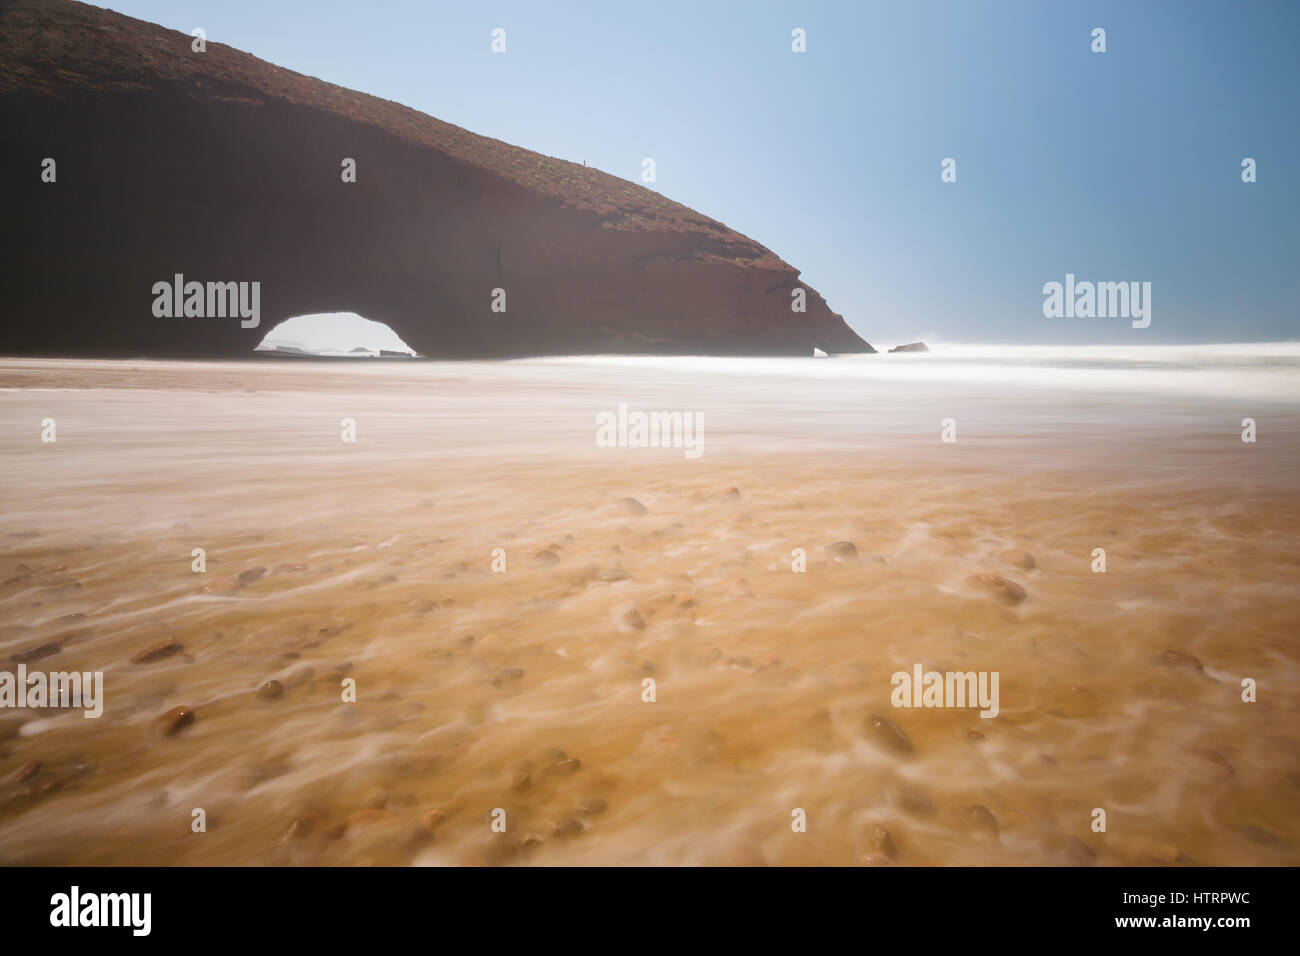 Long exposure of the Red arches and rocky beach at the Atlantic Ocean in the region Sous-Massa-Draa, Sidi Ifni, Legzira, Morocco, Africa. Stock Photo